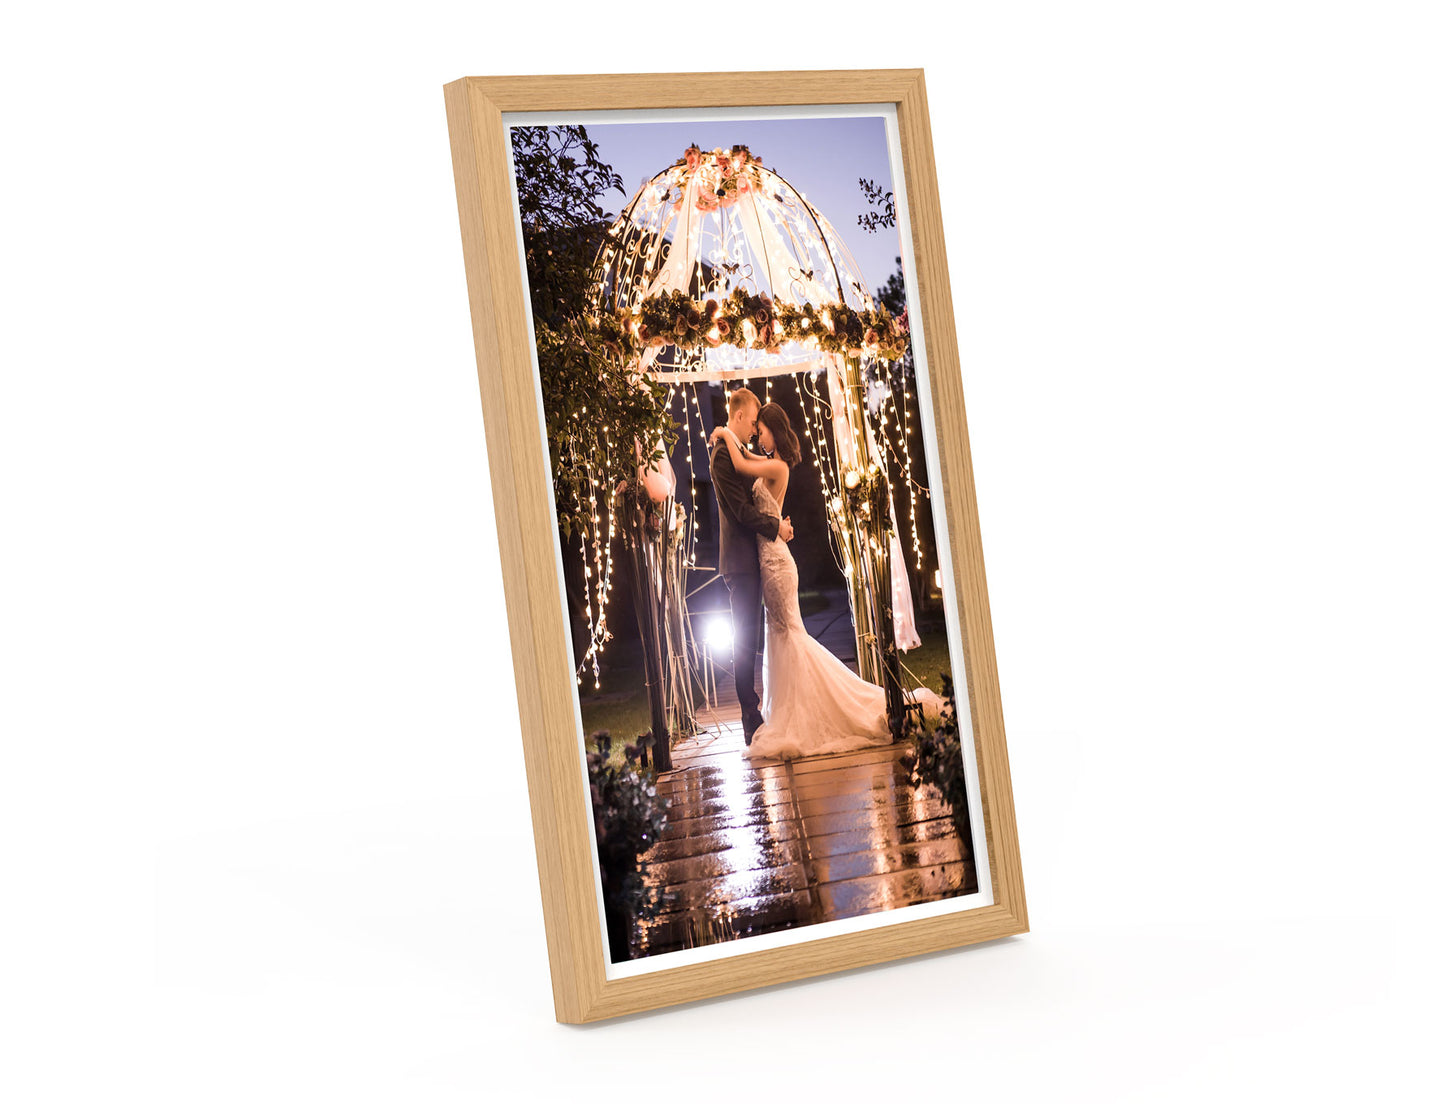 21.5-inch Frameo Wi-Fi Digital Photo Frame - White Border with 3 Interchangeable Frames Included. Oak, Black and White